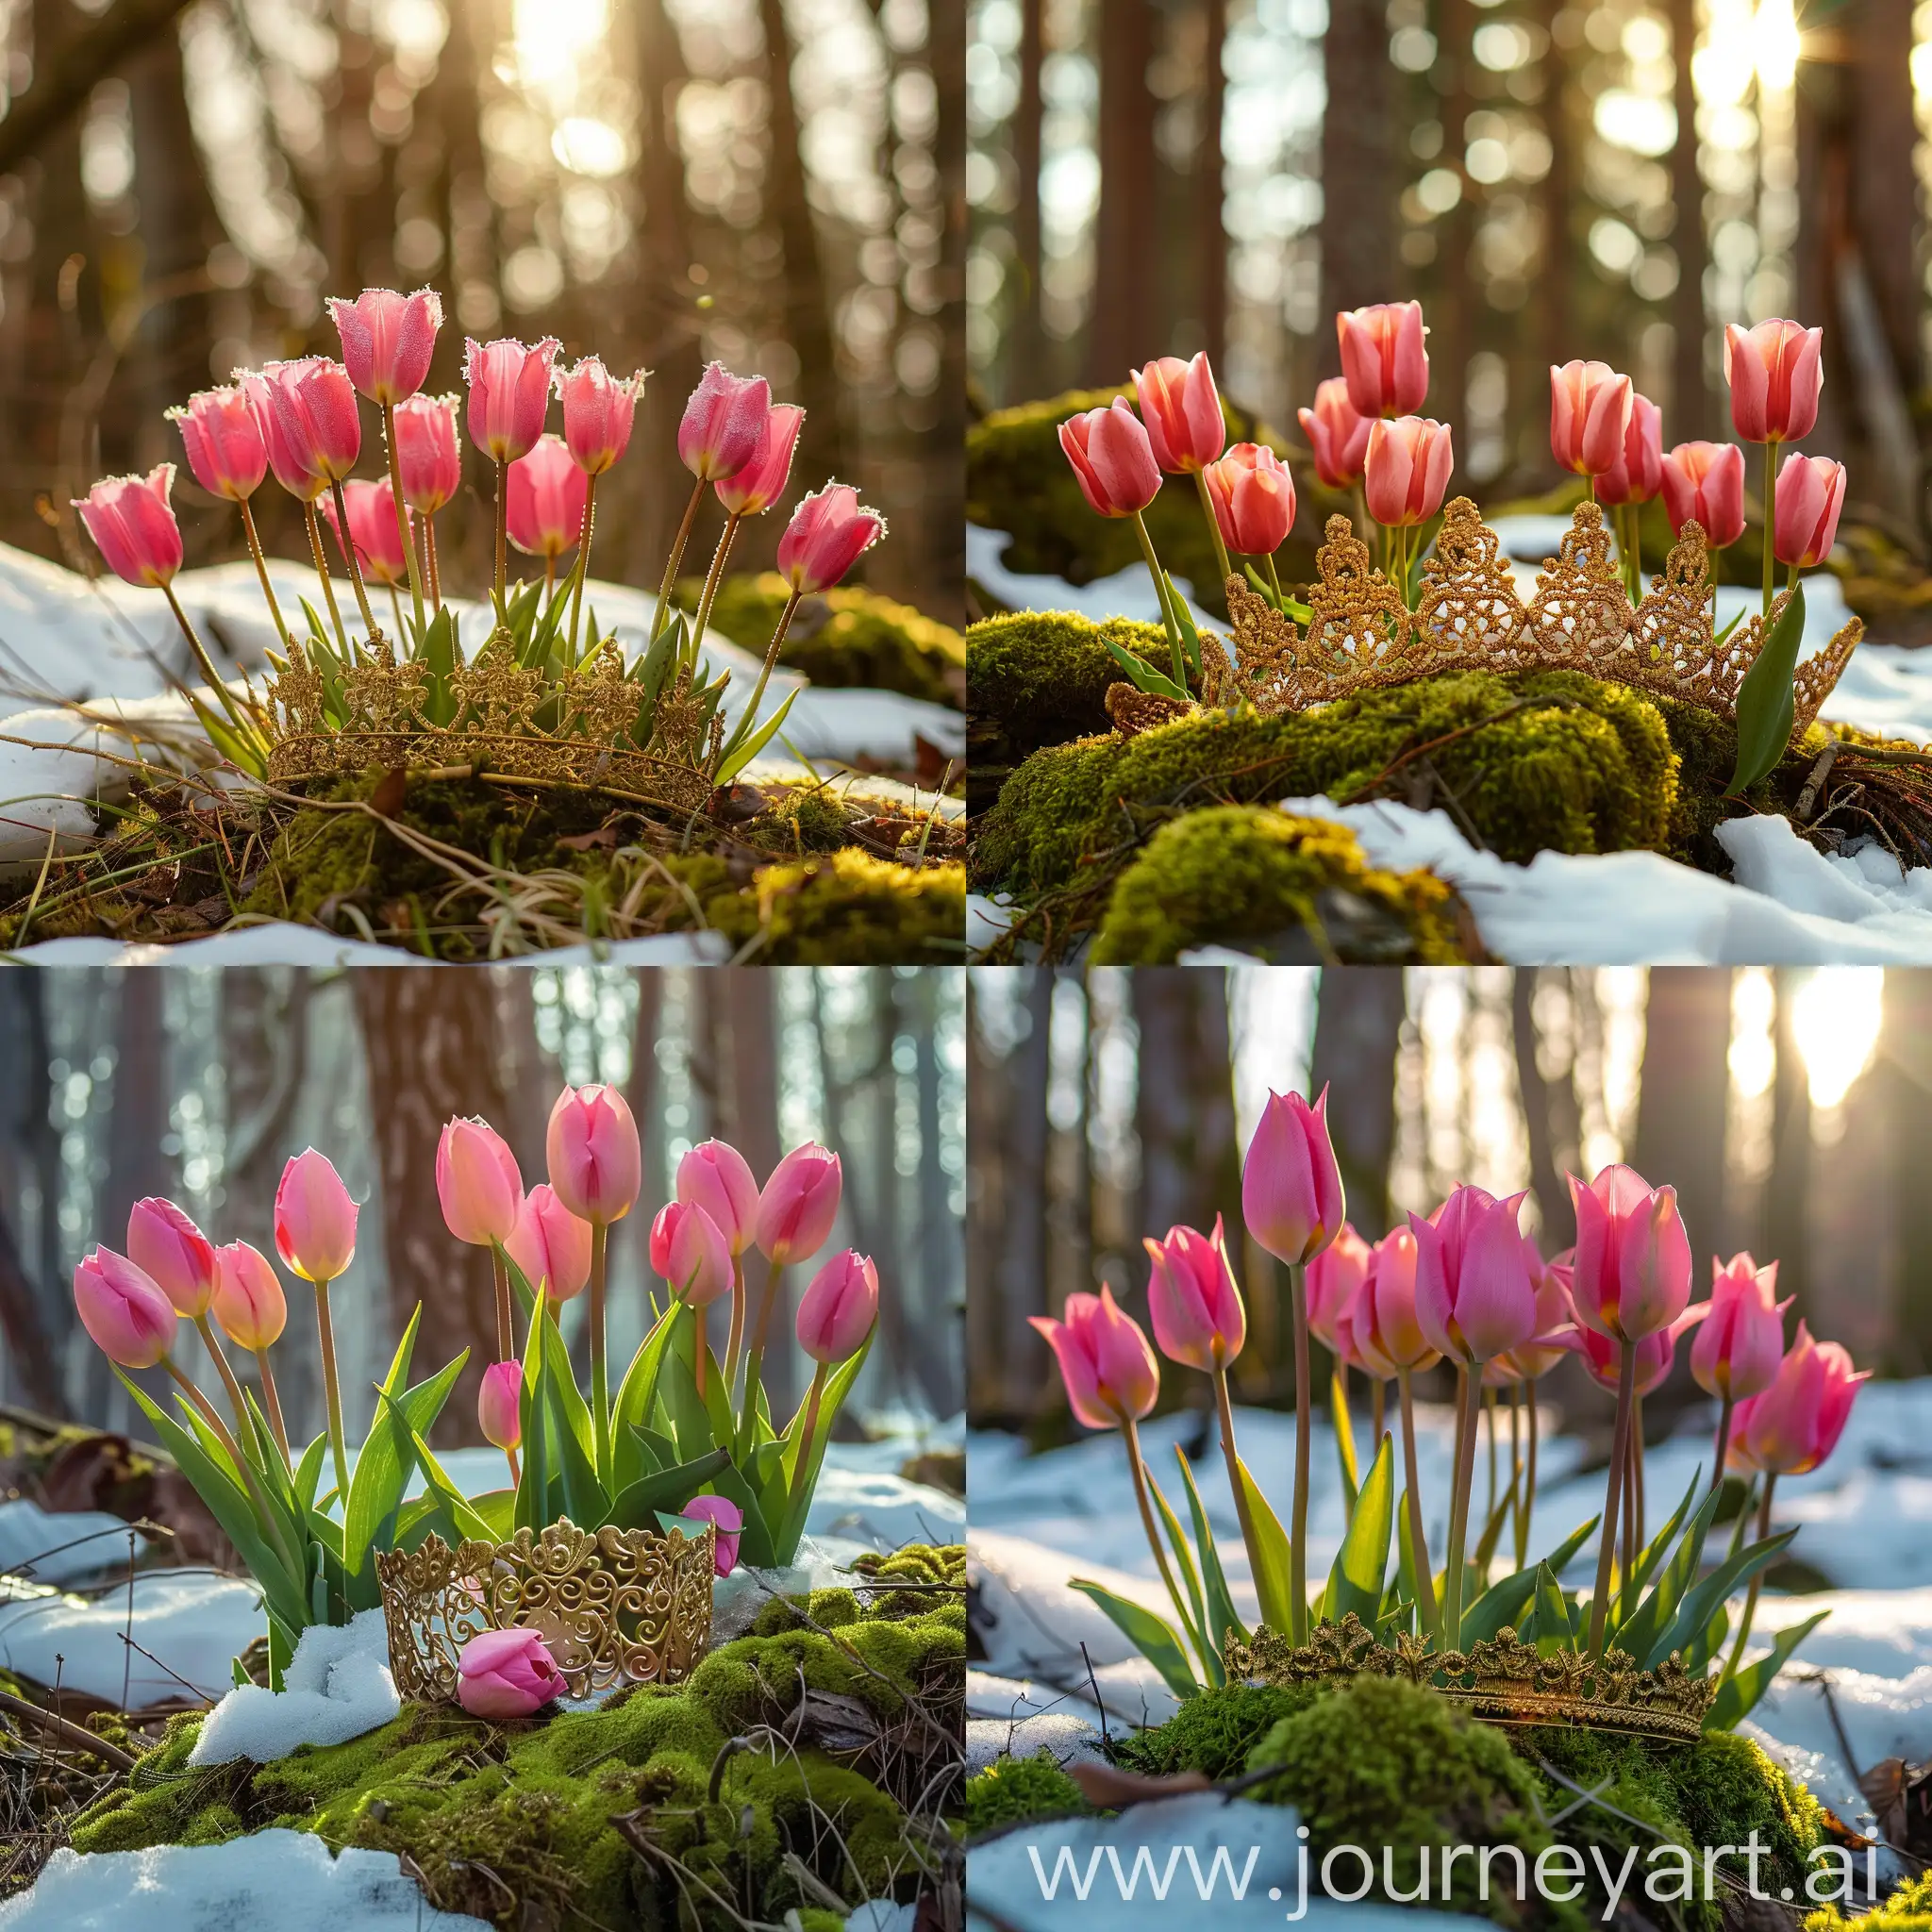 Golden-Crown-Adorned-with-Pink-Tulips-in-Enchanted-Forest-Scene